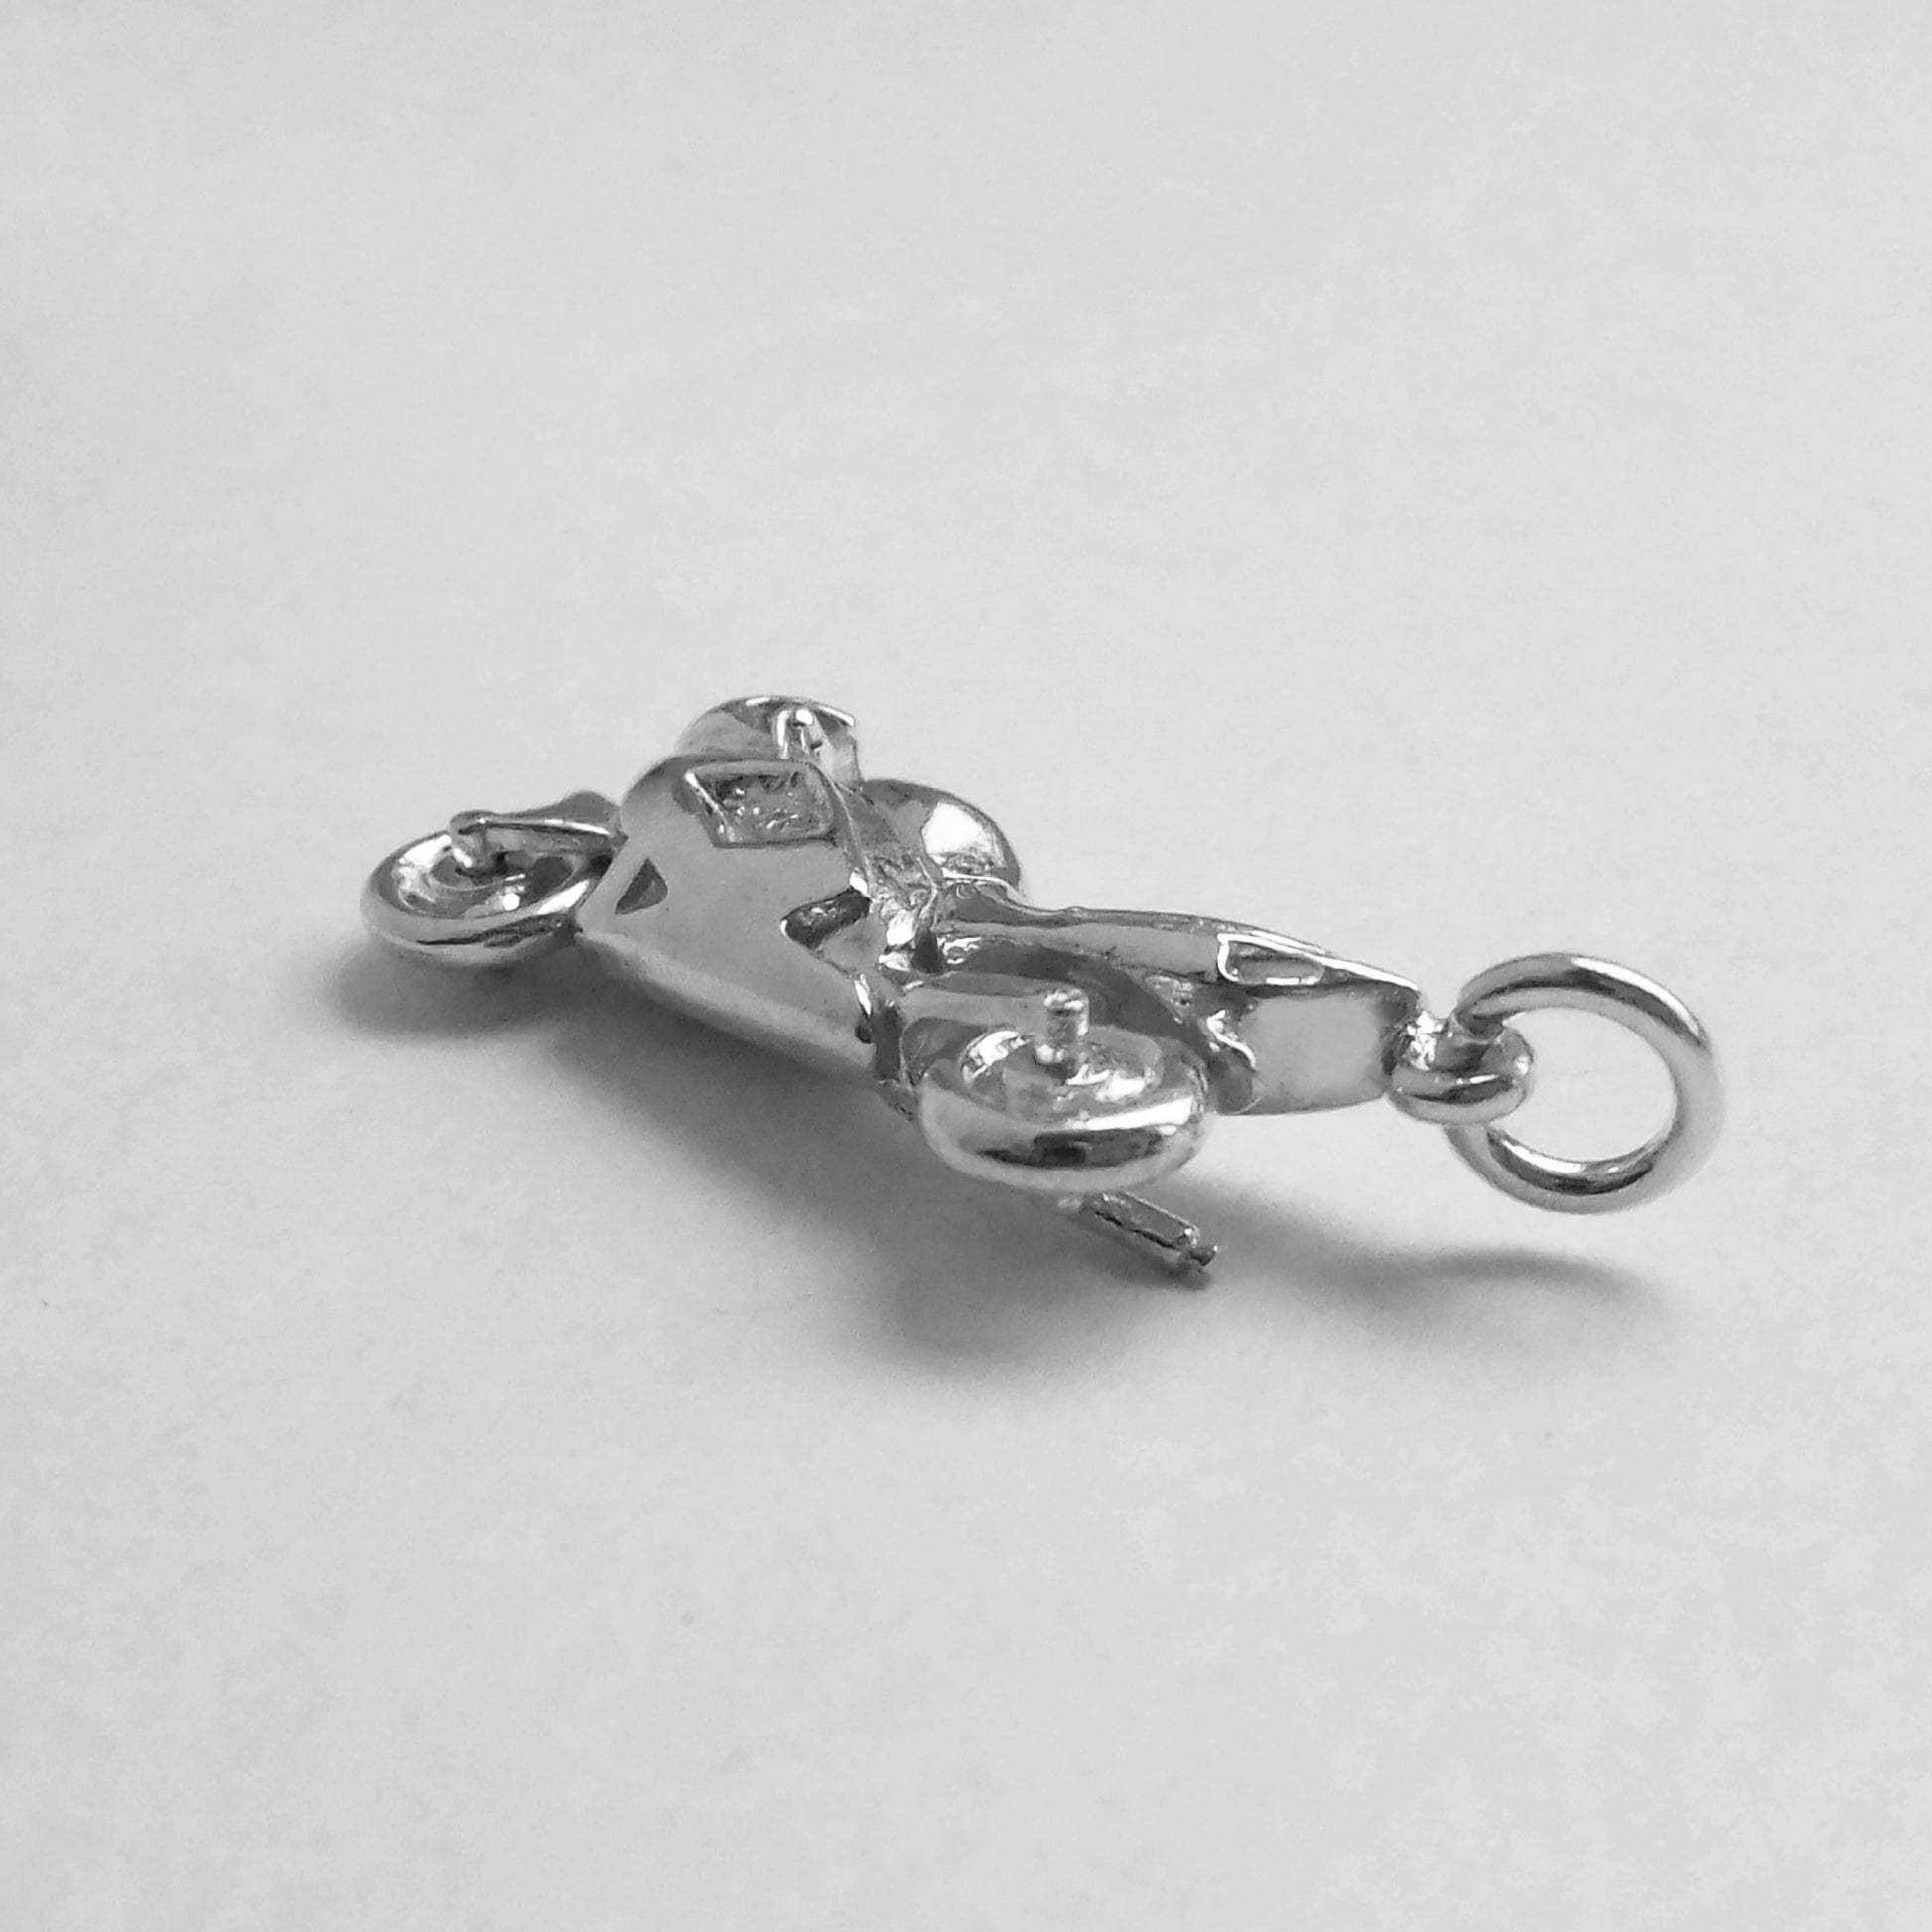 motorcycle charm